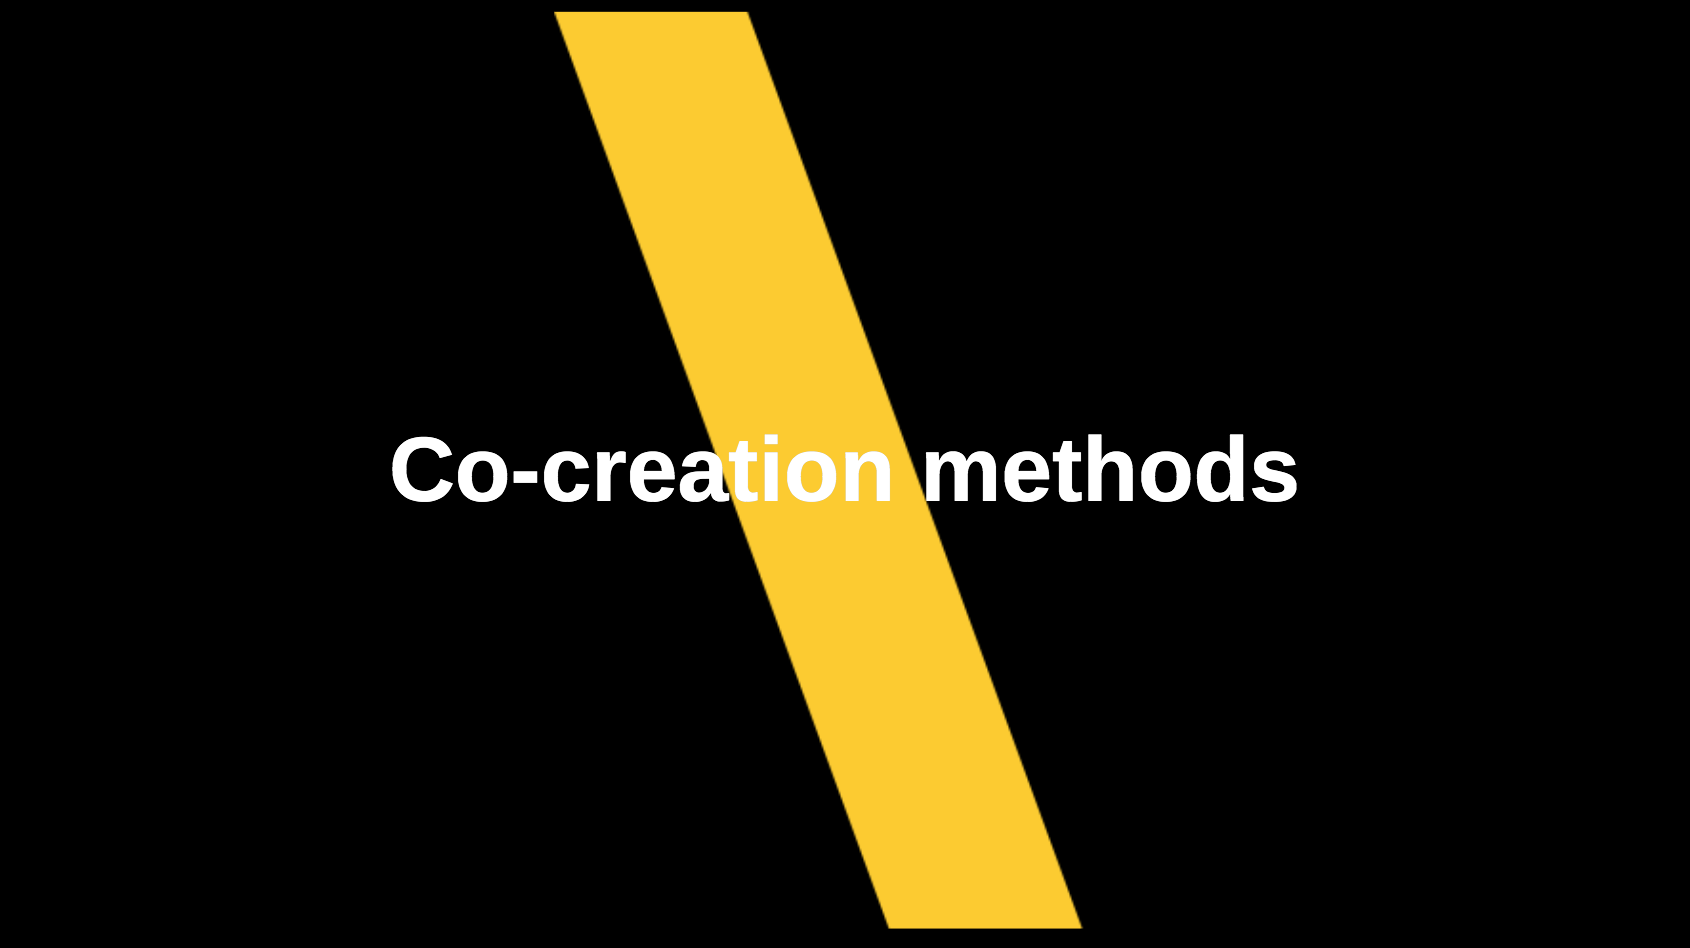 Co-creation: Next generation of creative performance